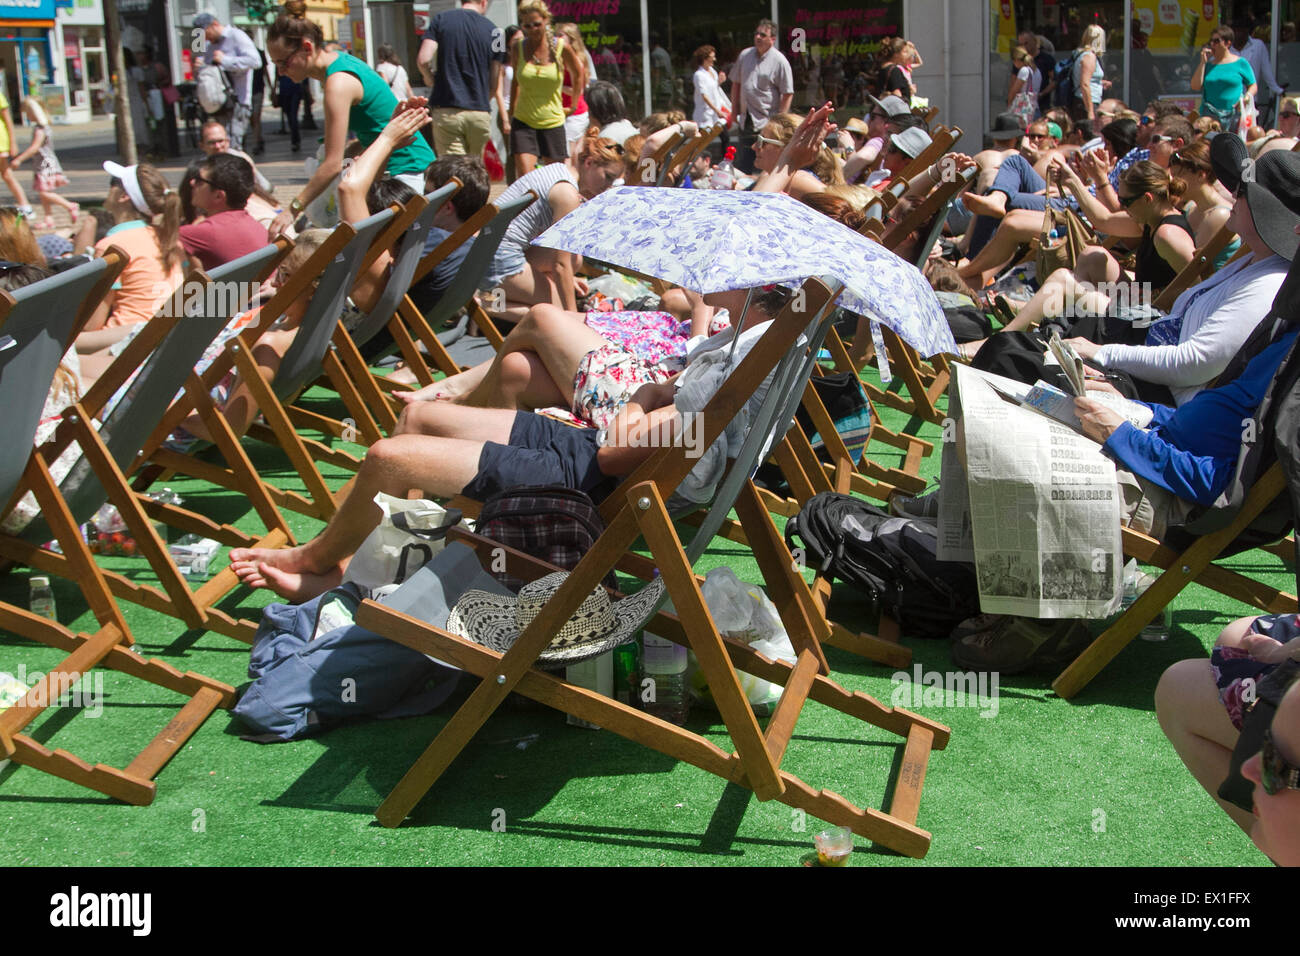 Wimbledon, London, UK. 04th July, 2015. People watch a live tennis match between Roger Federer and Sam Groth on big screens in Wimbledon town centre Credit:  amer ghazzal/Alamy Live News Stock Photo